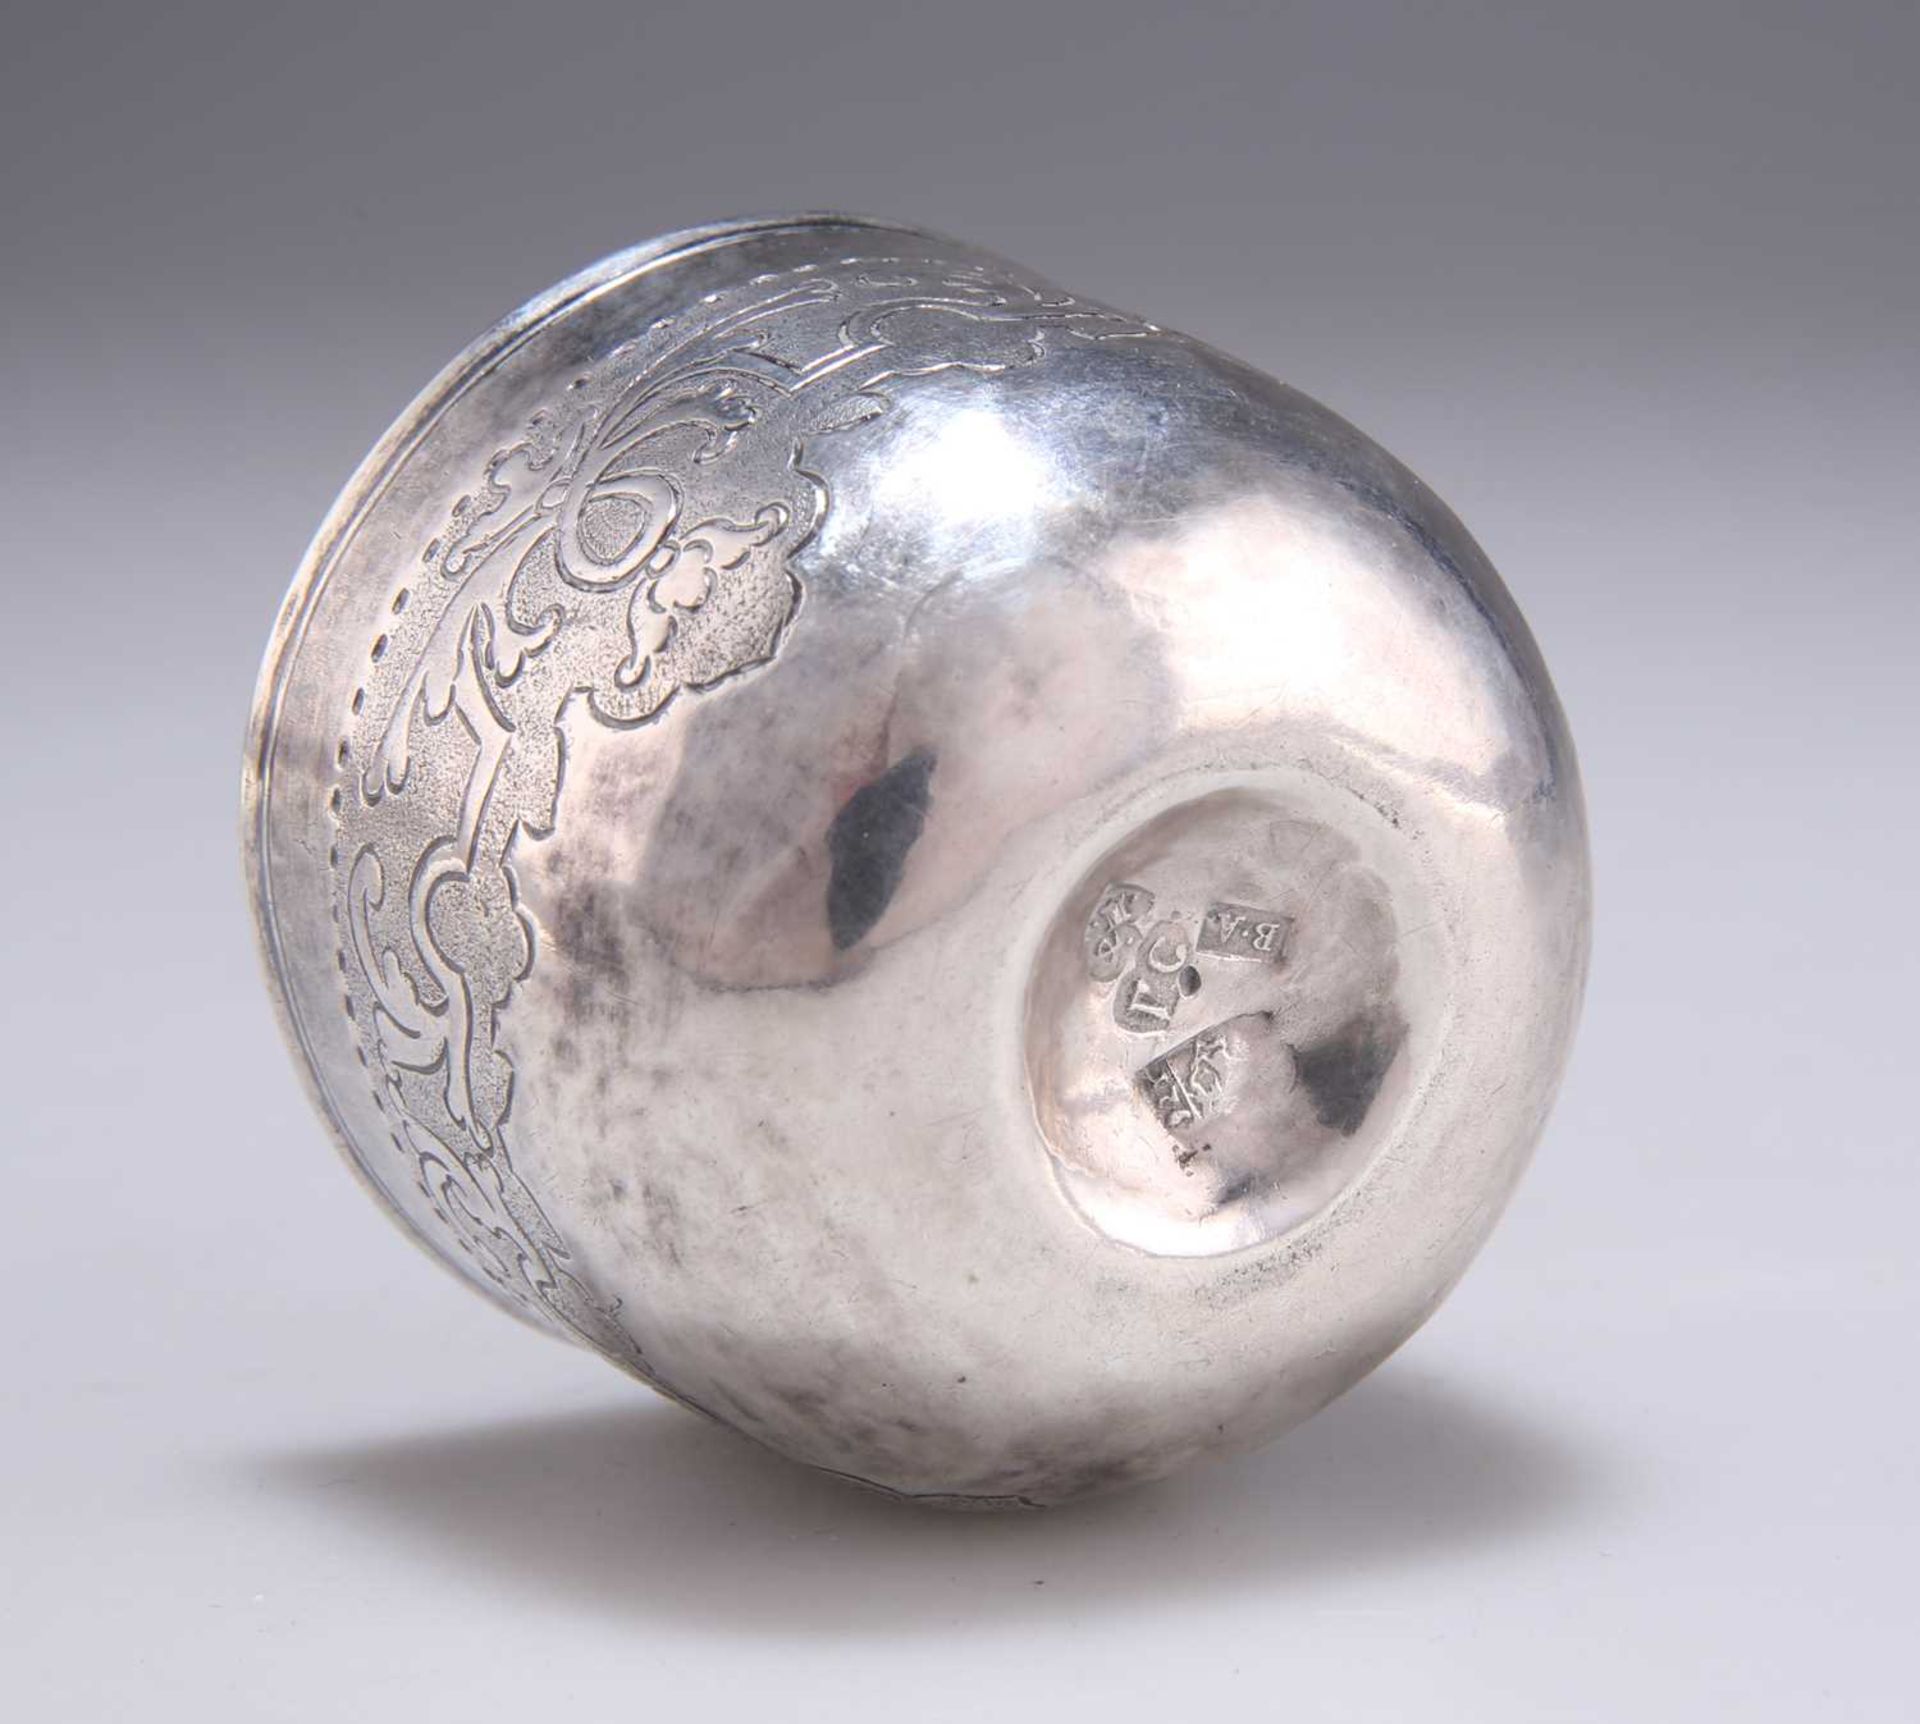 AN 18TH CENTURY RUSSIAN SILVER TUMBLER CUP - Image 2 of 2